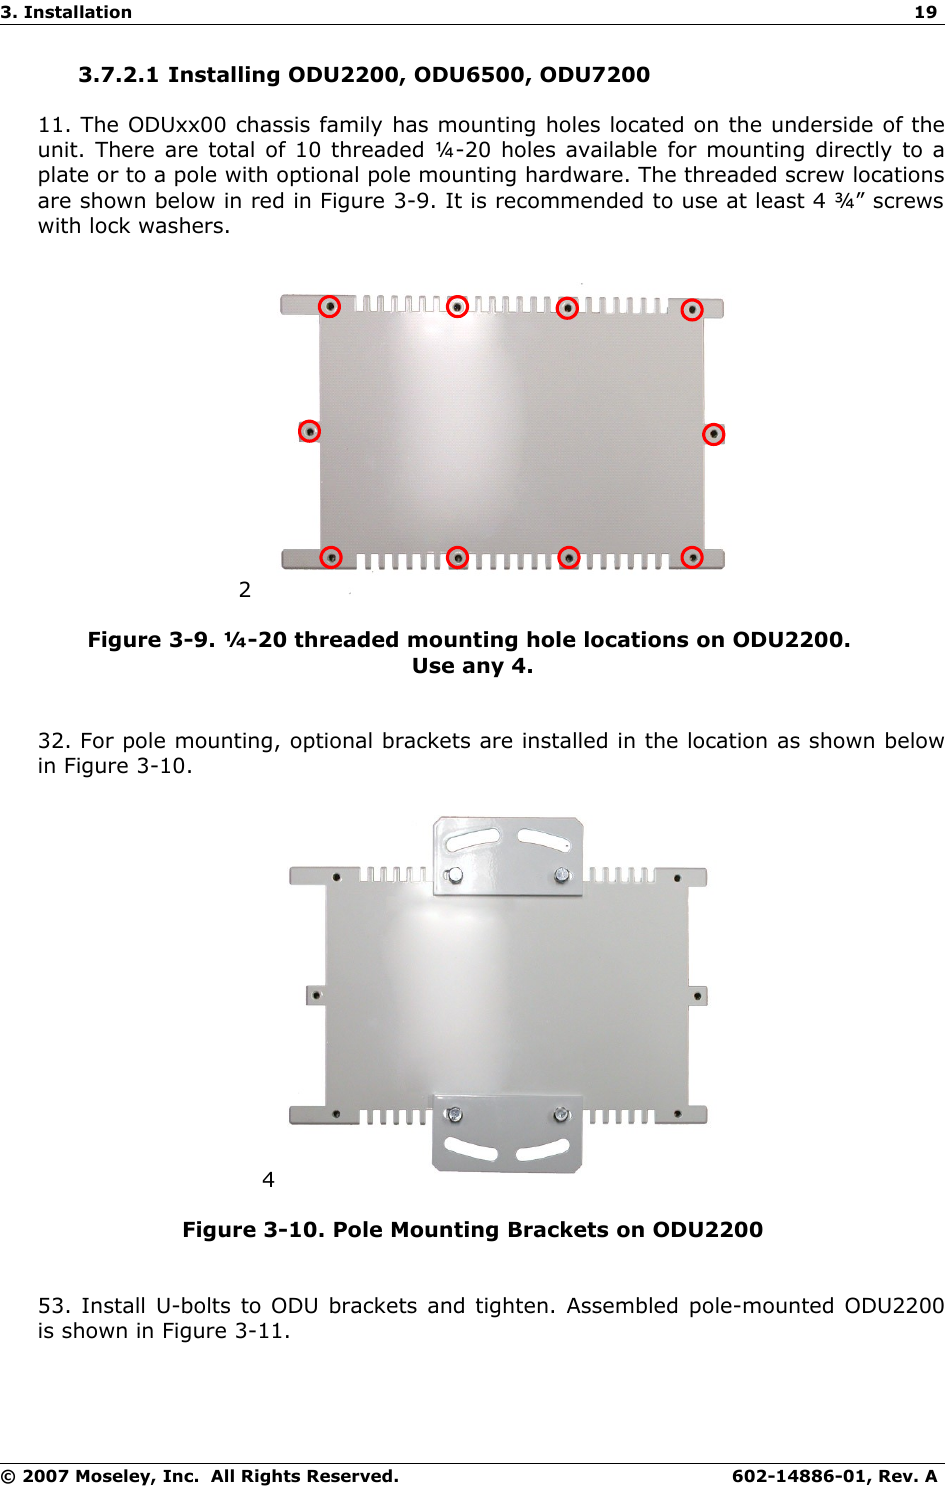 3. Installation 193.7.2.1 Installing ODU2200, ODU6500, ODU720011. The ODUxx00 chassis family has mounting holes located on the underside of the unit. There are total of 10 threaded ¼-20 holes available for mounting directly to a plate or to a pole with optional pole mounting hardware. The threaded screw locations are shown below in red in Figure 3-9. It is recommended to use at least 4 ¾” screws with lock washers.2Figure 3-9. ¼-20 threaded mounting hole locations on ODU2200. Use any 4.32. For pole mounting, optional brackets are installed in the location as shown below in Figure 3-10.4Figure 3-10. Pole Mounting Brackets on ODU220053. Install U-bolts to ODU brackets and tighten. Assembled pole-mounted ODU2200 is shown in Figure 3-11.© 2007 Moseley, Inc.  All Rights Reserved. 602-14886-01, Rev. A